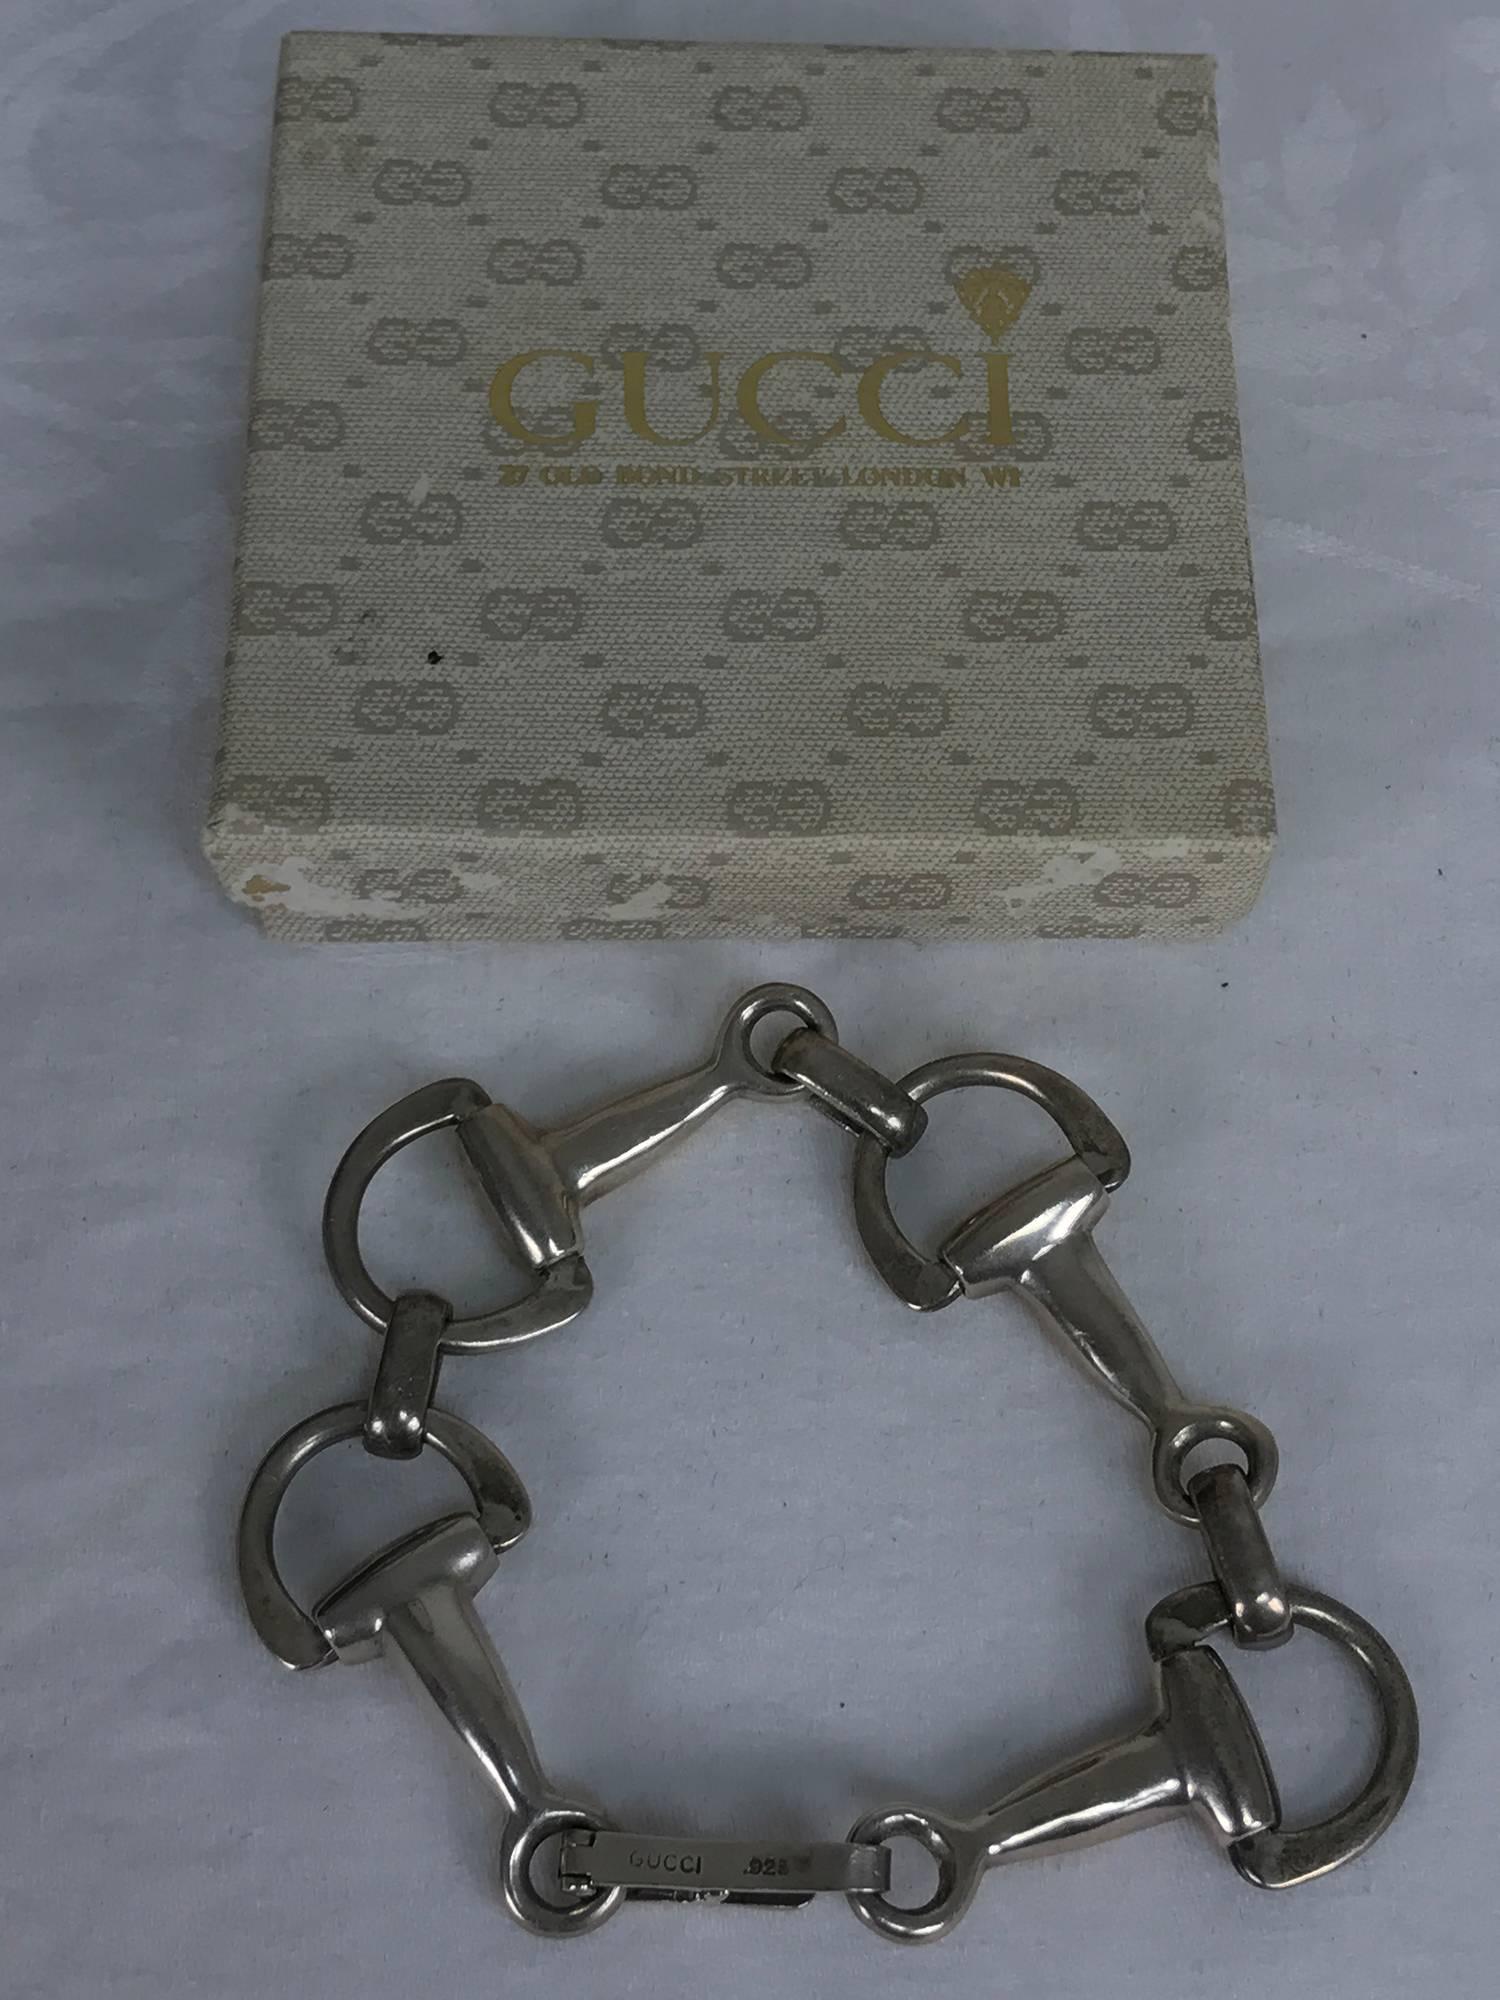 Beautiful and heavy Gucci sterling silver 925 bracelet...Horse bit design with snap closure...Together with the original box.
Measurements are:
8 1/2